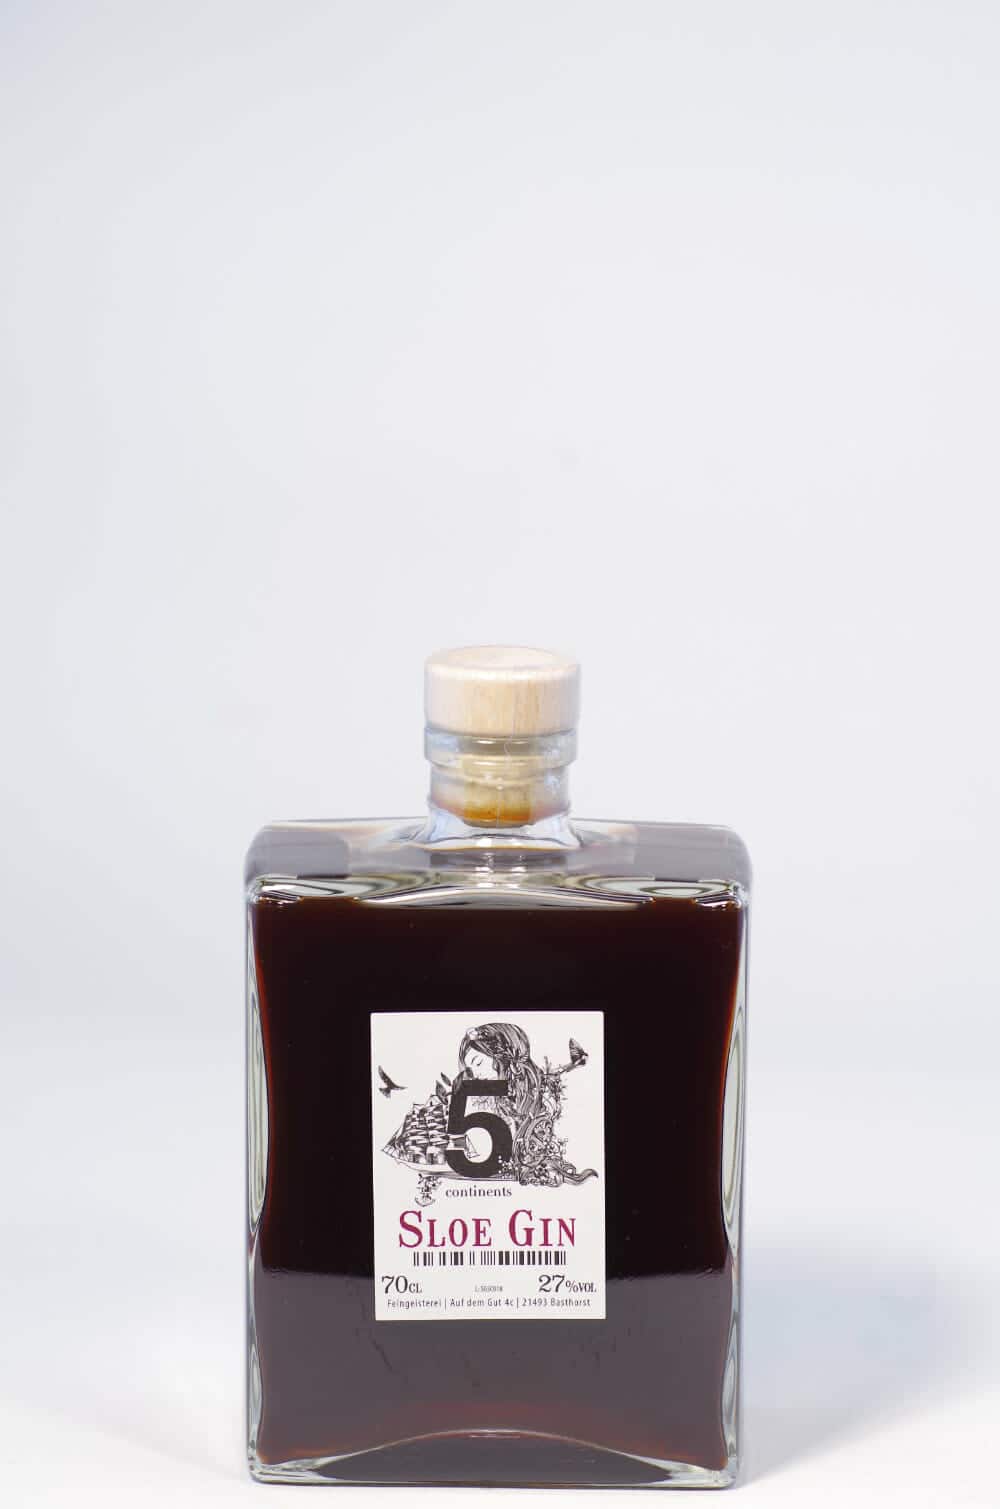 5 Continents Sloe gin